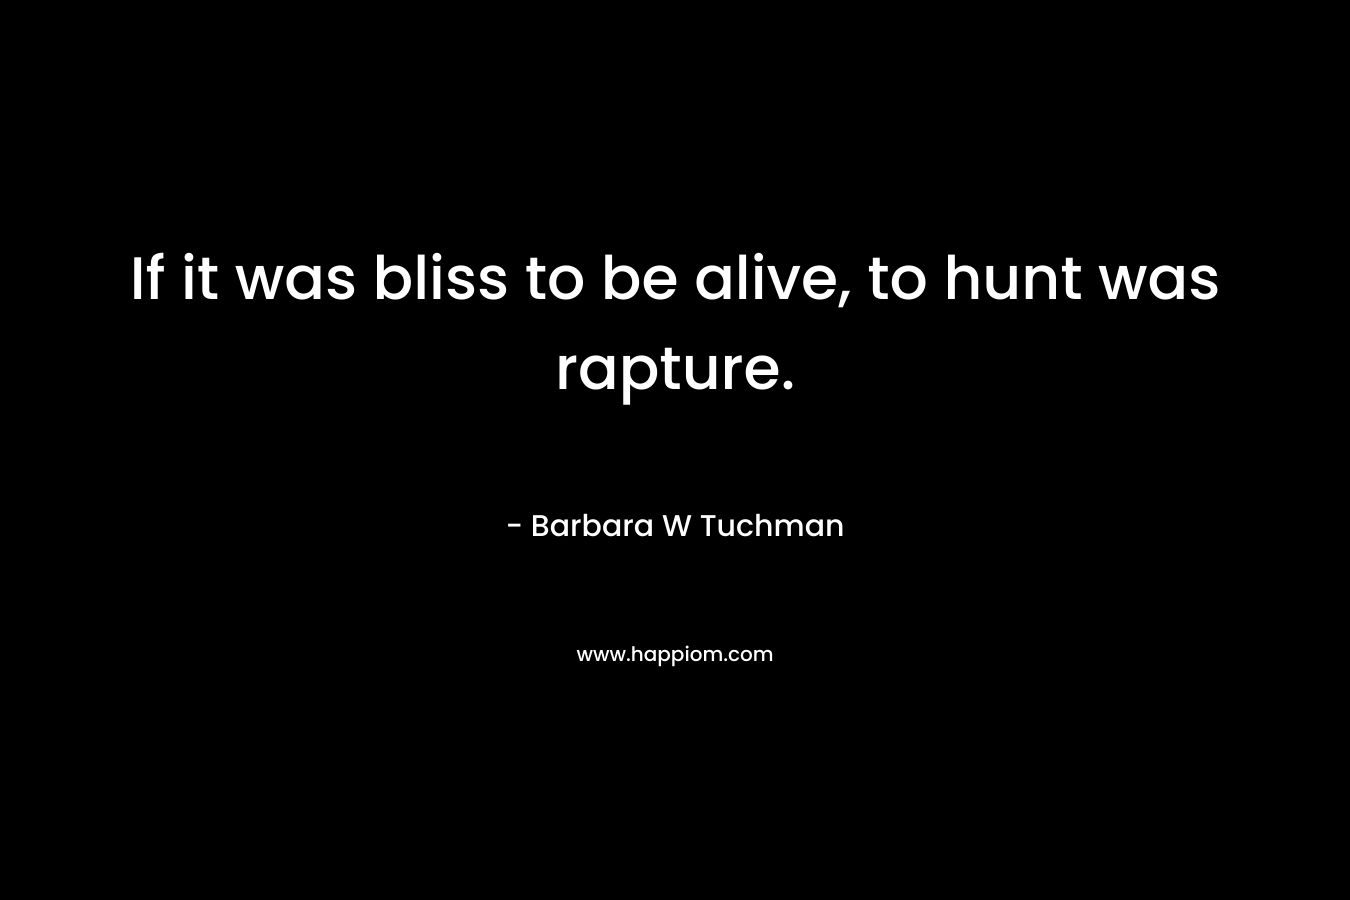 If it was bliss to be alive, to hunt was rapture.